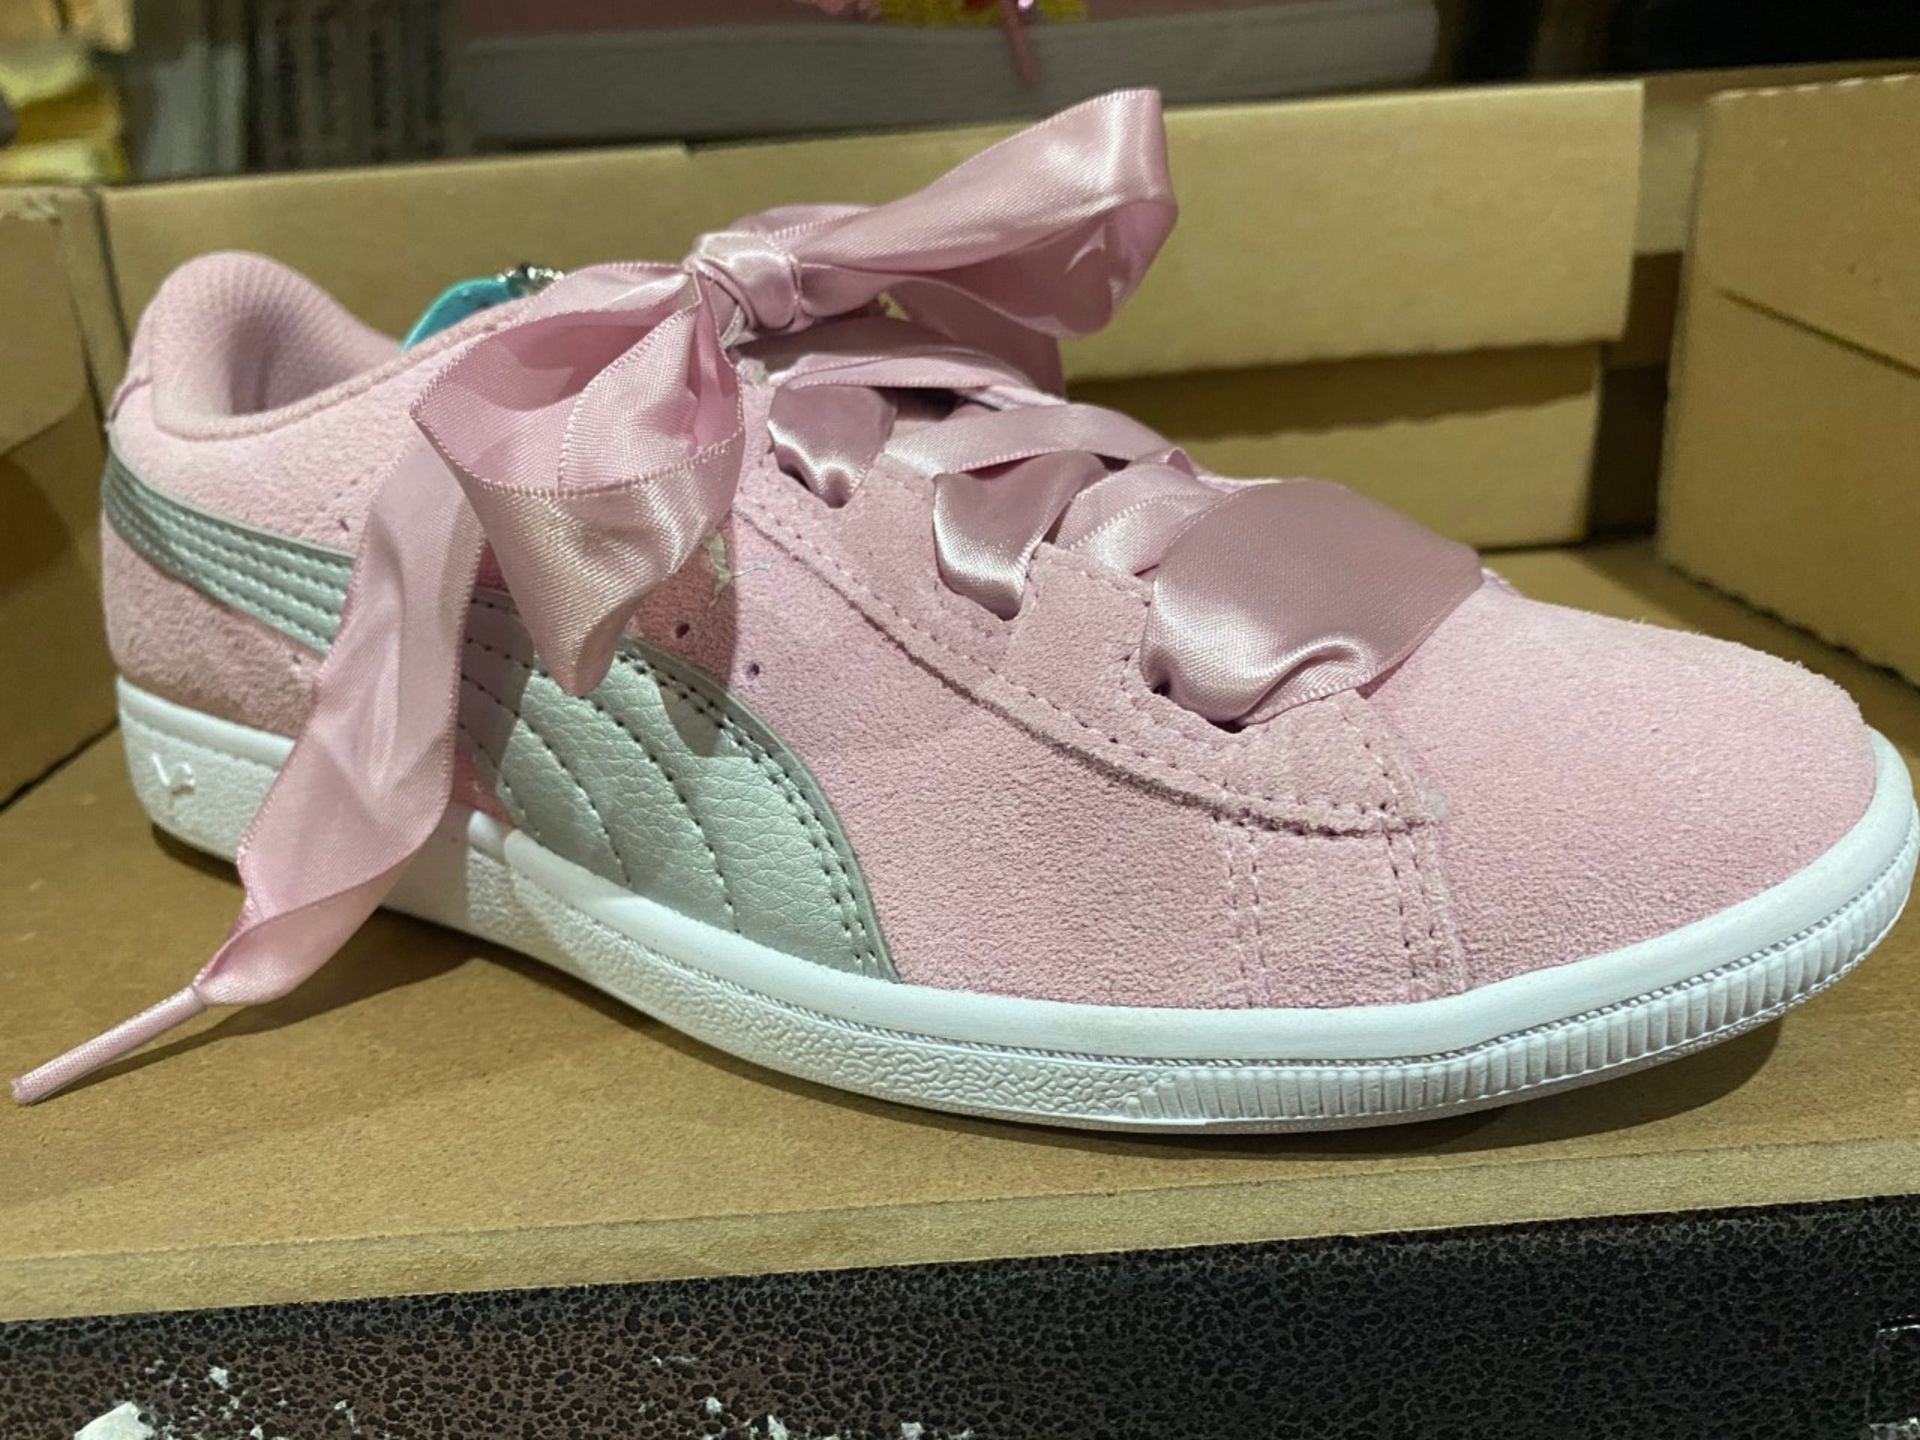 NEW & BOXED PUMA PINK RIBBON TRAINERS SIZE JUNIOR 4 (15/14)